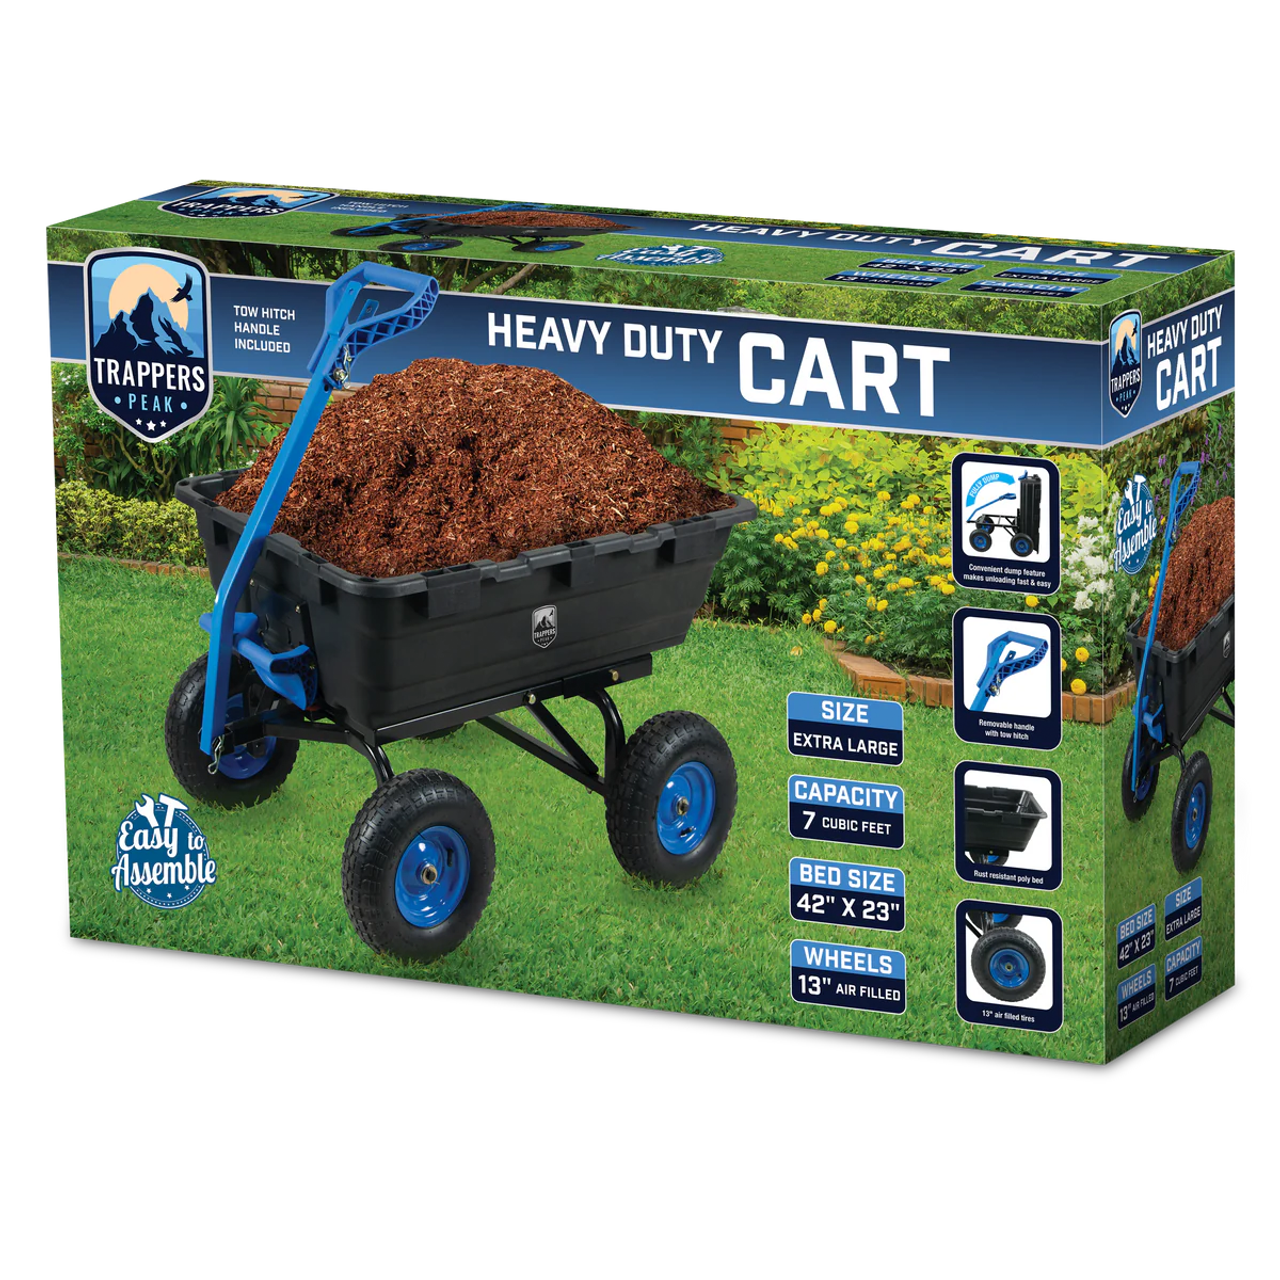 Trappers Peak® Heavy-Duty Cart product image